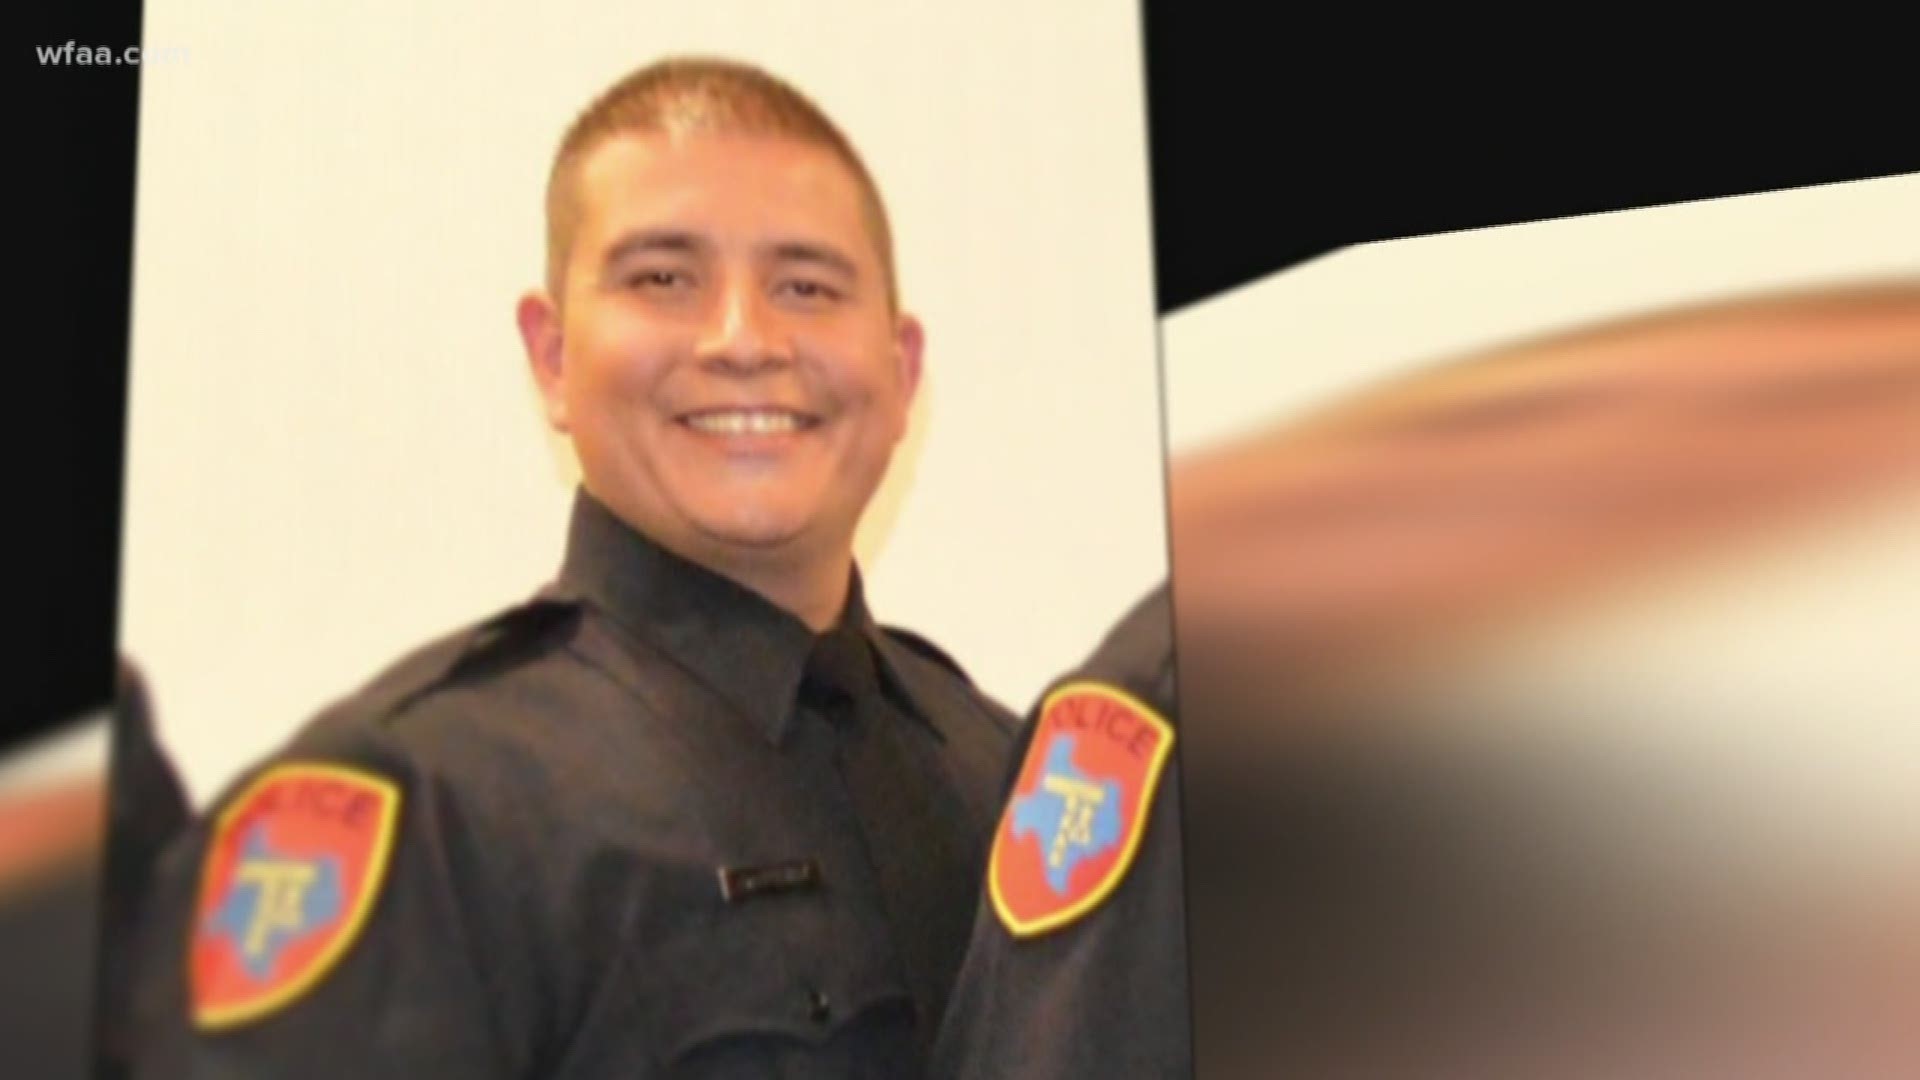 Denton police Officer Urban Rodriguez Jr. was shot in the head during a traffic stop. The police chief calls his recovery just one week later “miraculous."